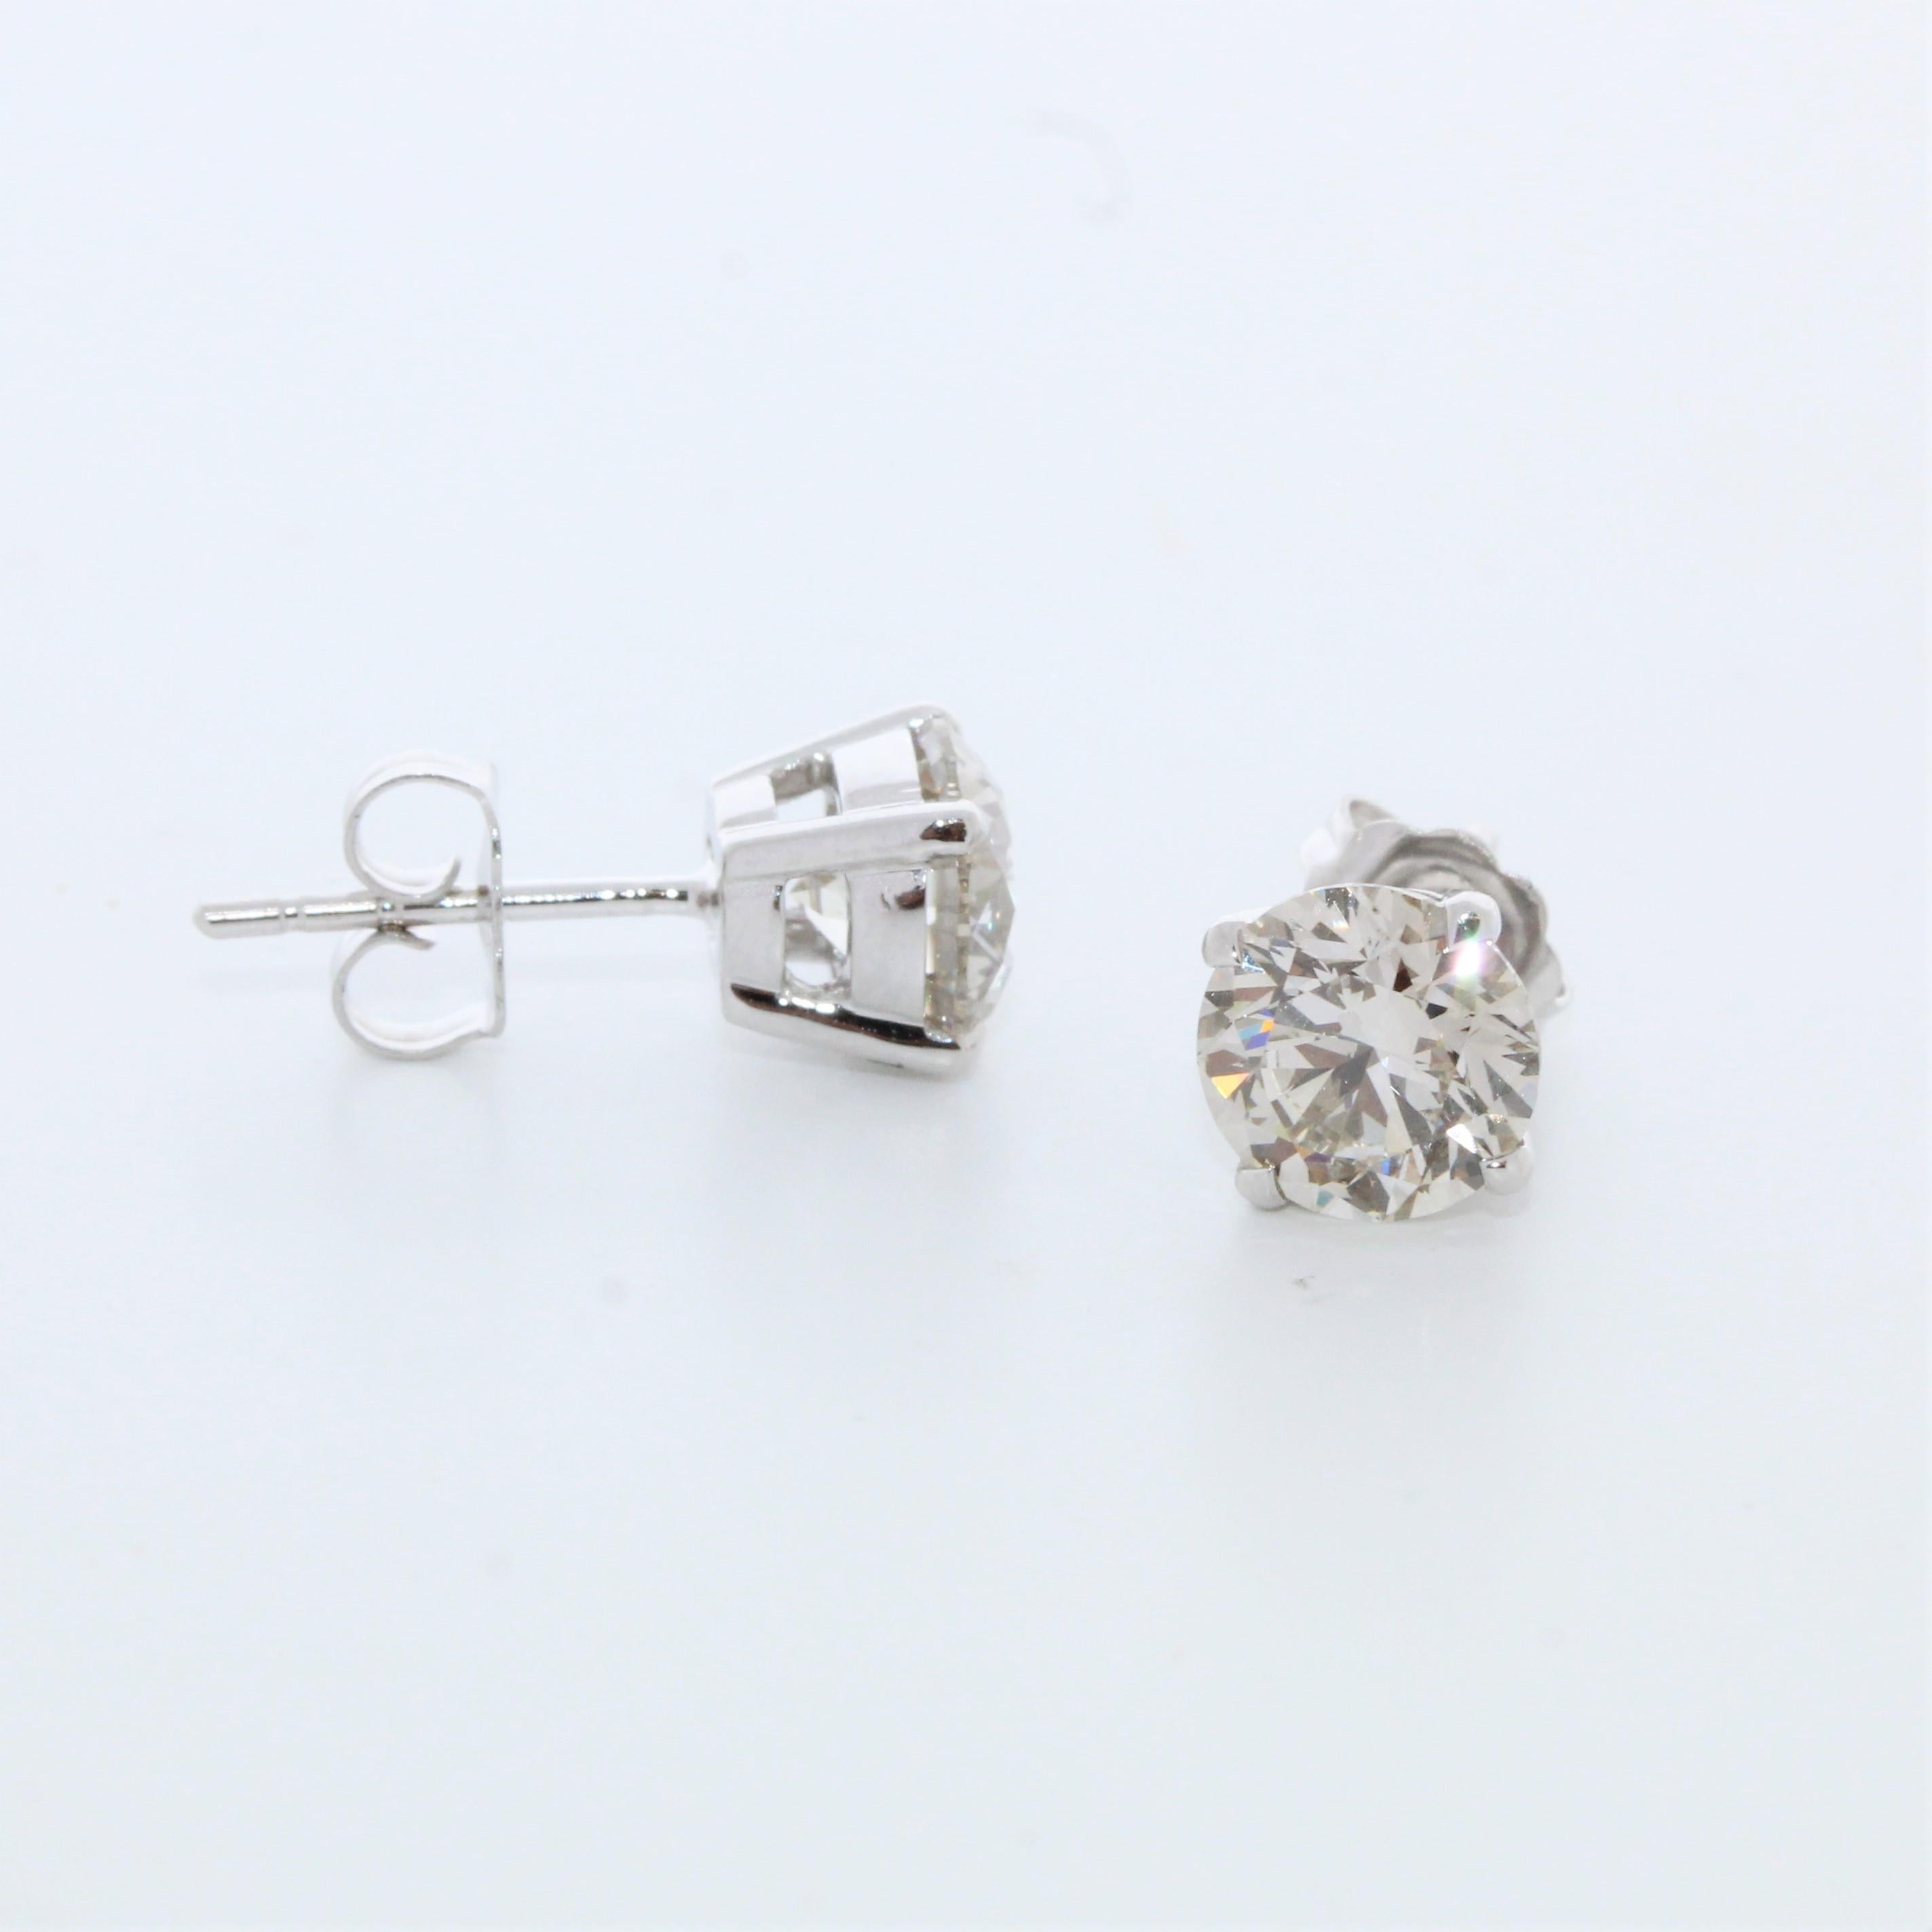 Capture the essence of timeless elegance with these magnificent 3.01 Total Carat Weight EGL Certified Round Diamond Studs in 14k White Gold. Each stud features a captivating round diamond boasting a lustrous I color grade, With clarity ranging from